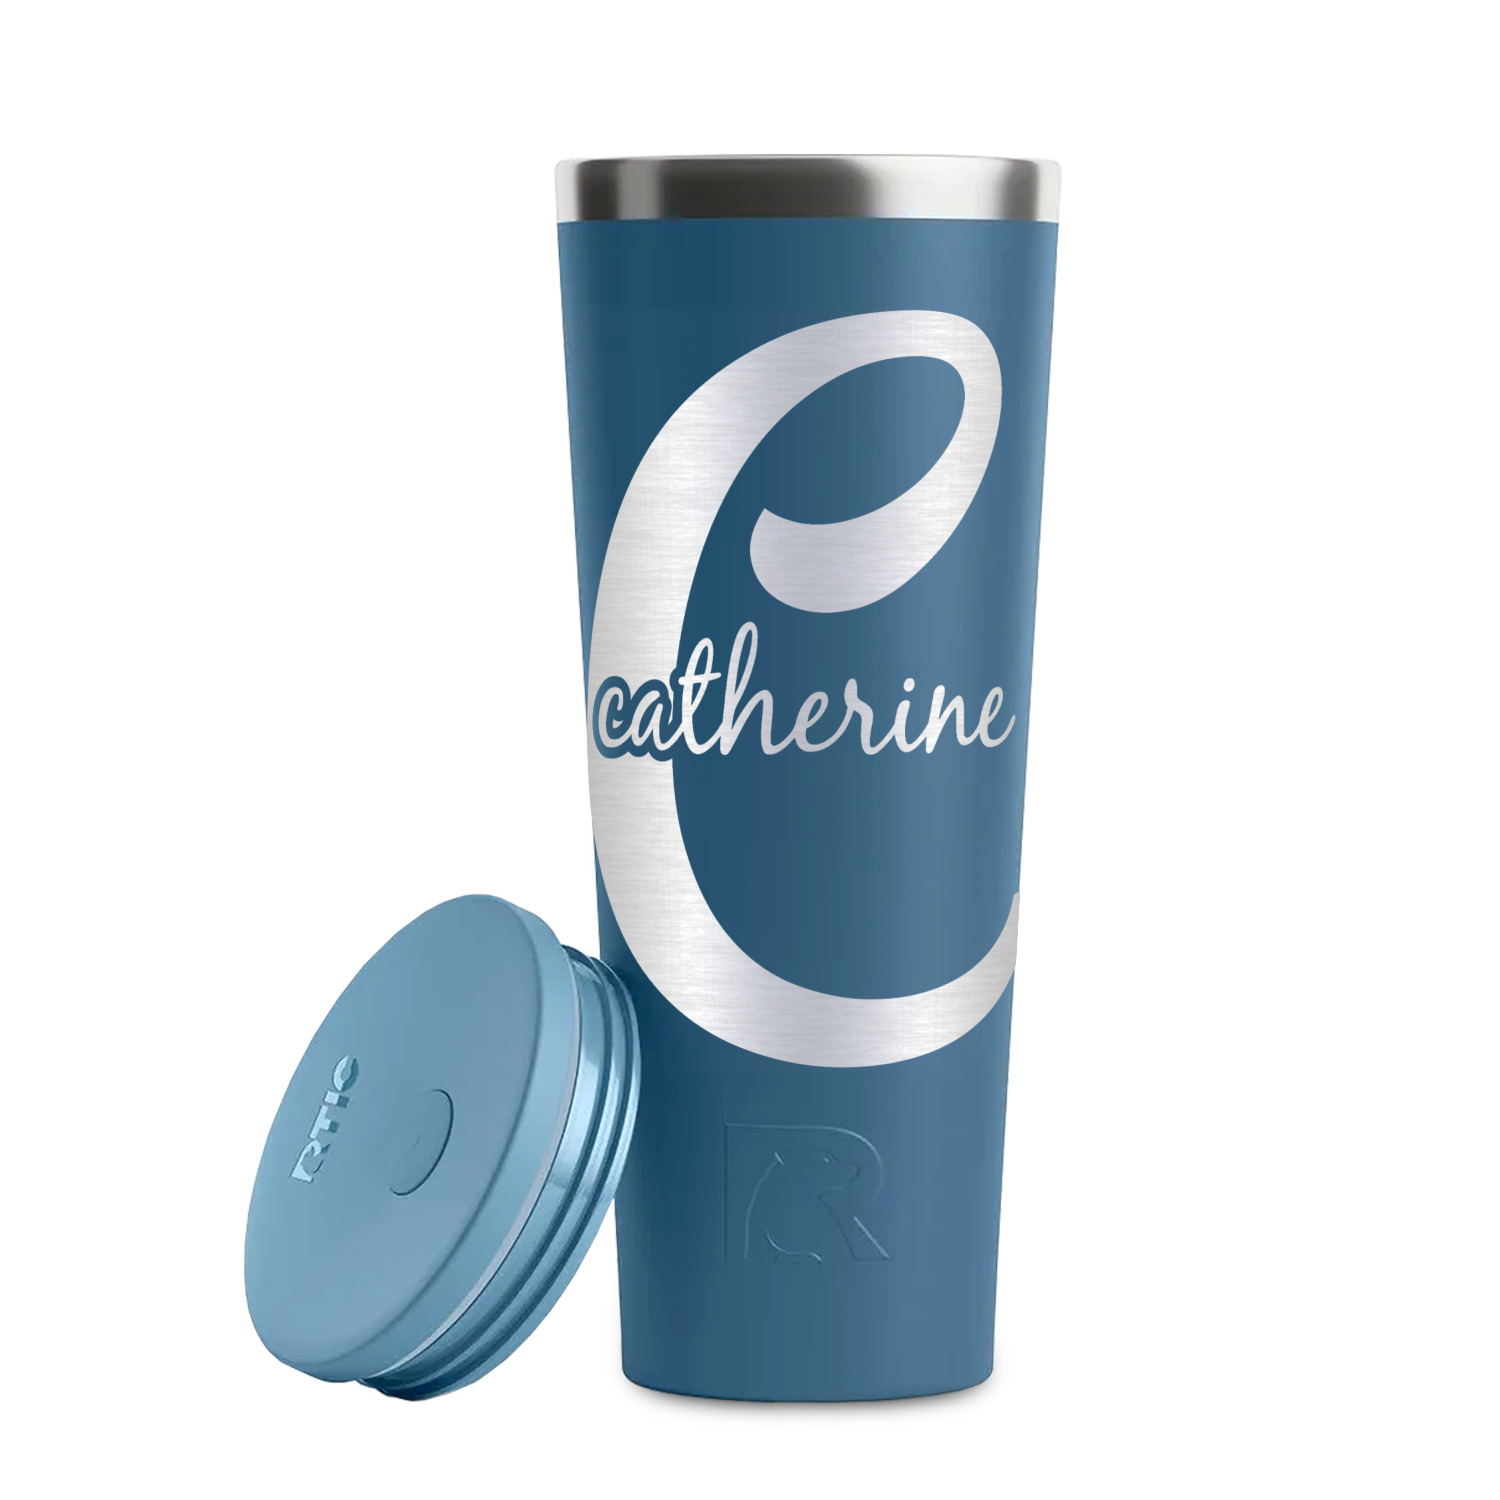 https://www.youcustomizeit.com/common/MAKE/837763/Name-Initial-Girly-Steel-Blue-RTIC-Everyday-Tumbler-28-oz-Lid-Off.jpg?lm=1698259131